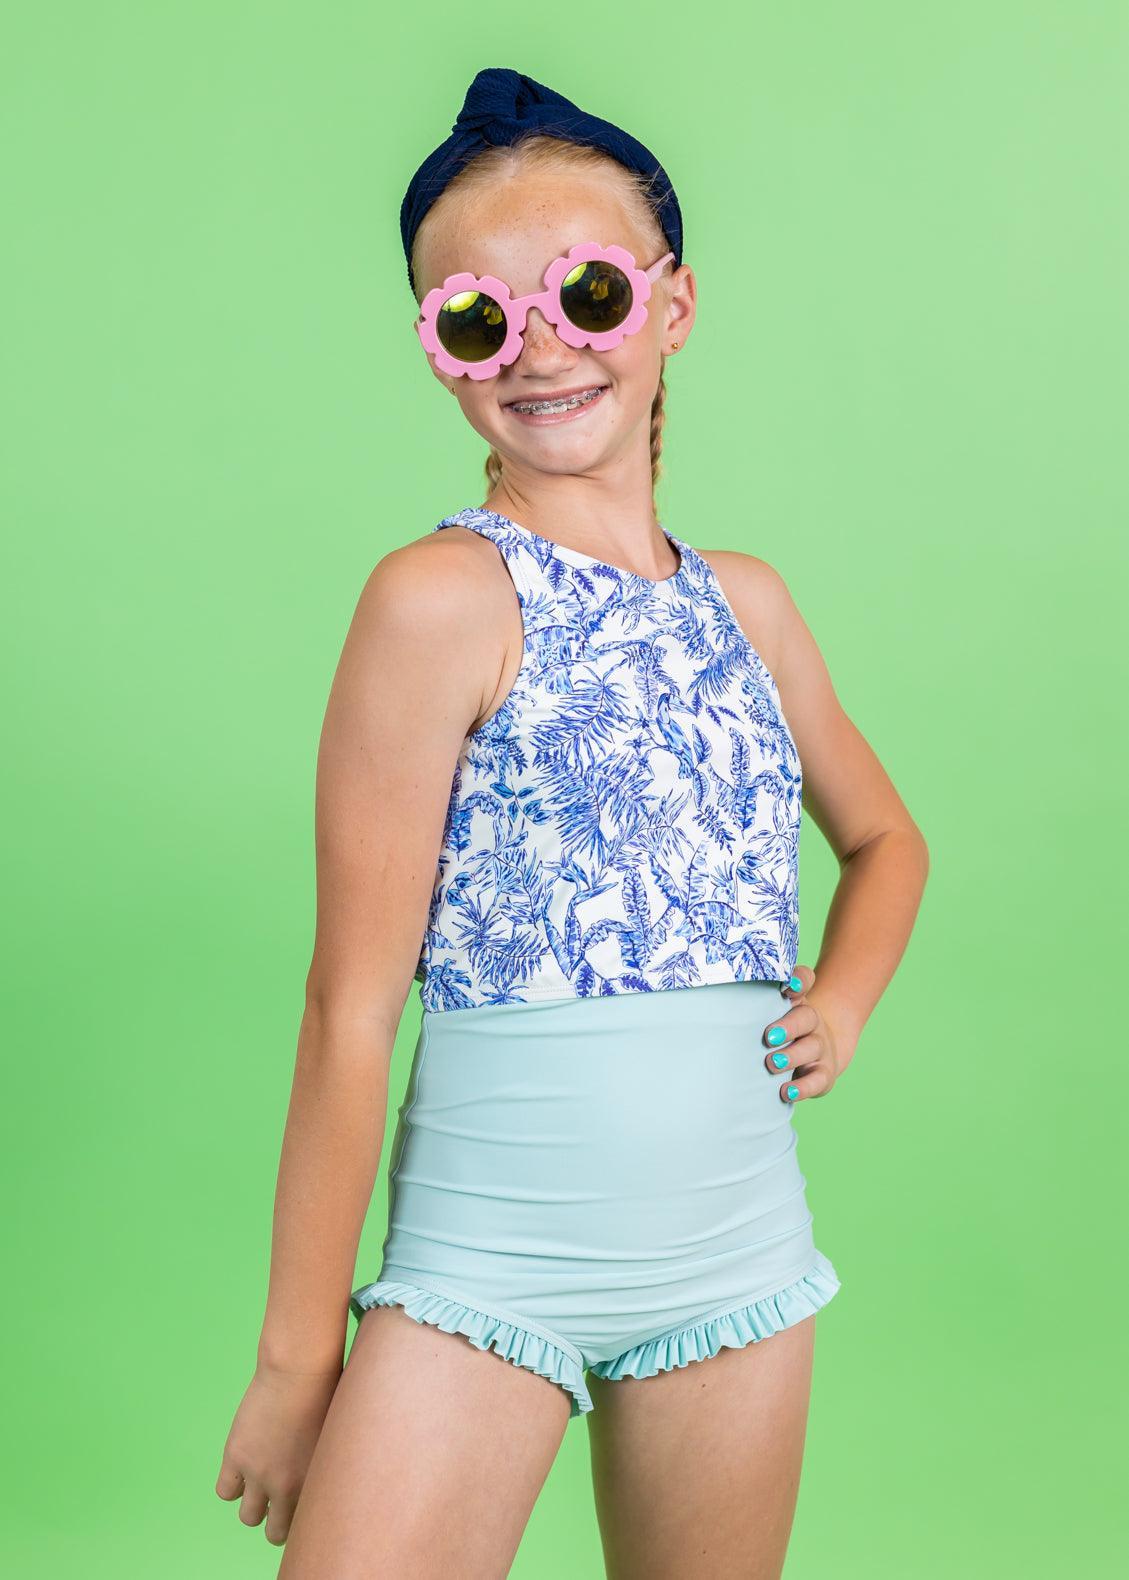 Teen Girl High-Waisted Swimsuit Bottoms - Painted Clams